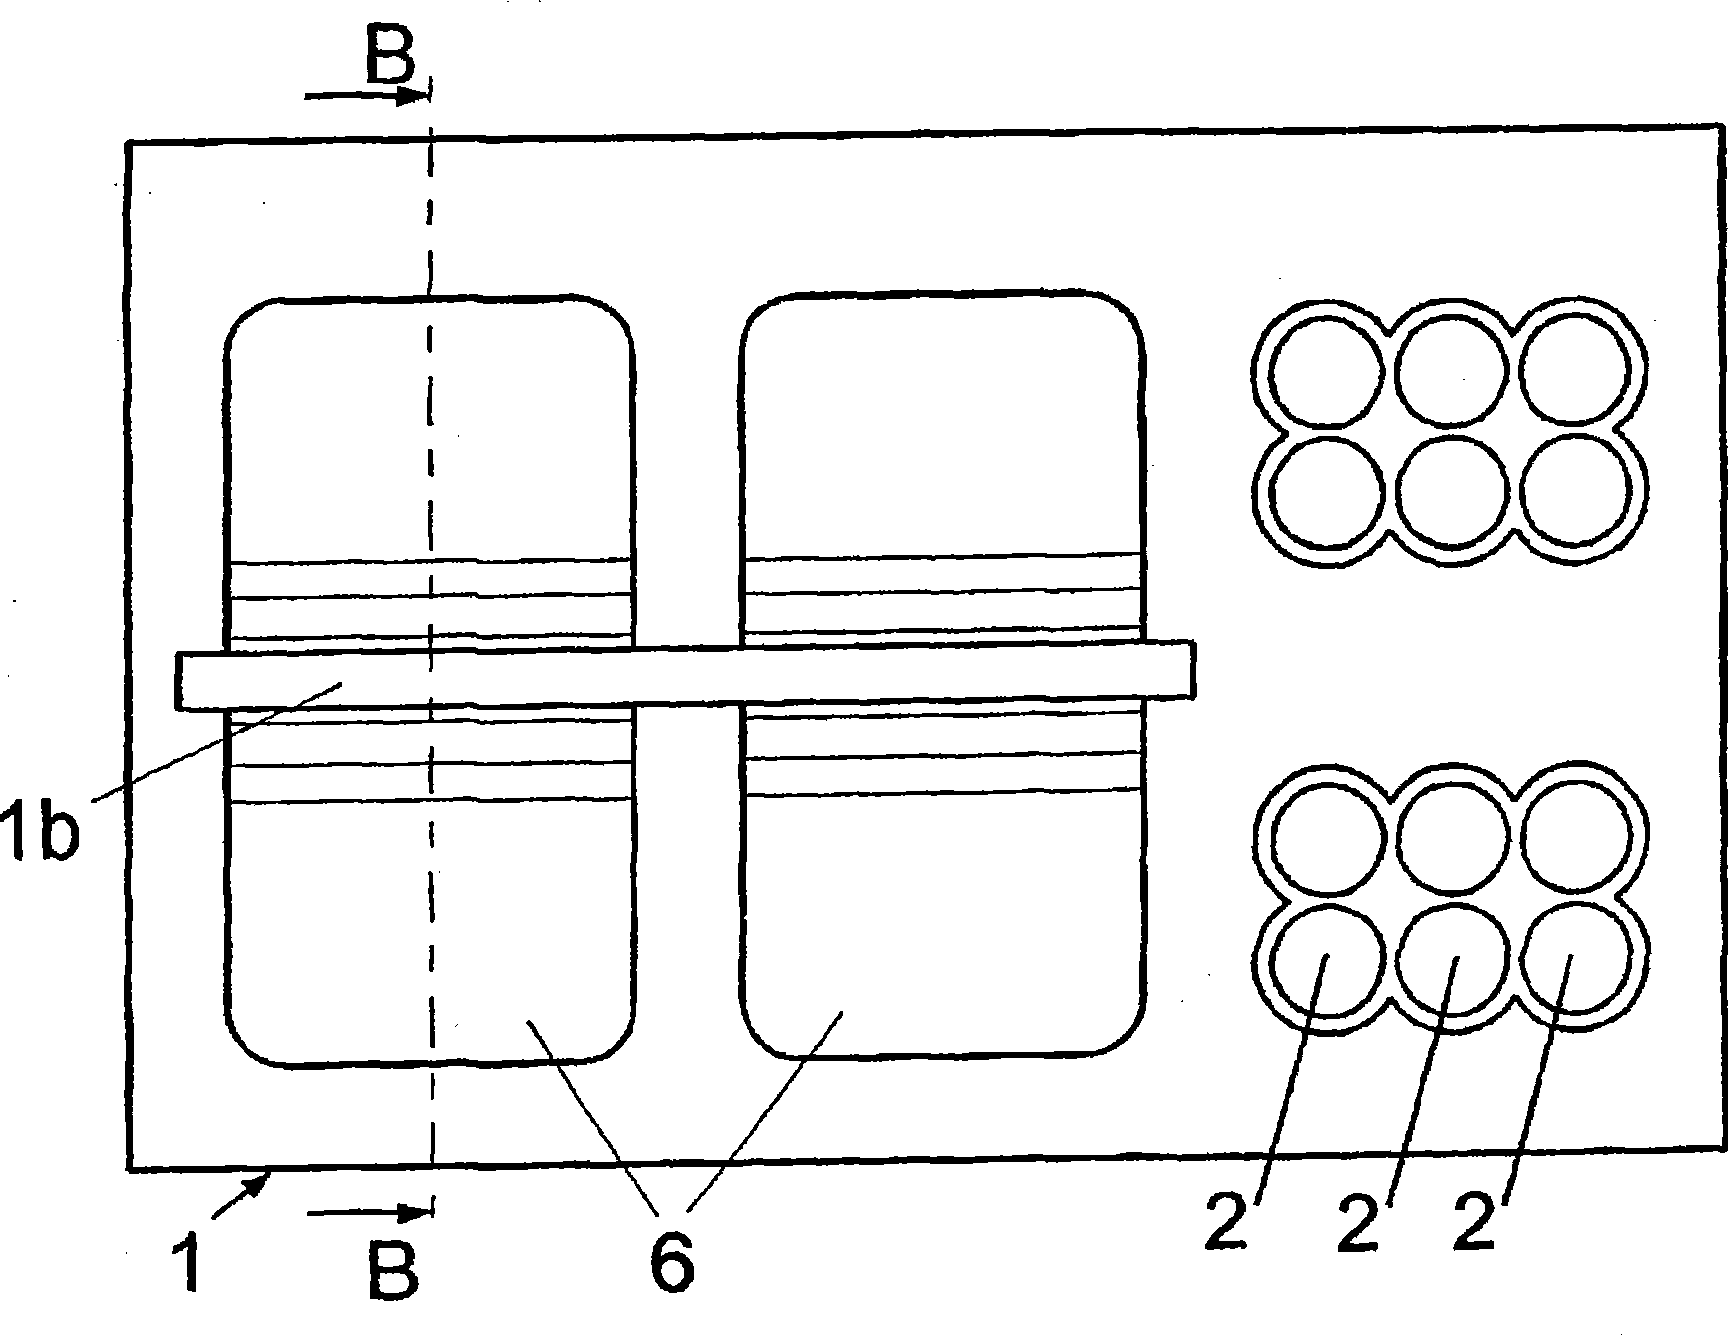 Device for separating liquids from gases